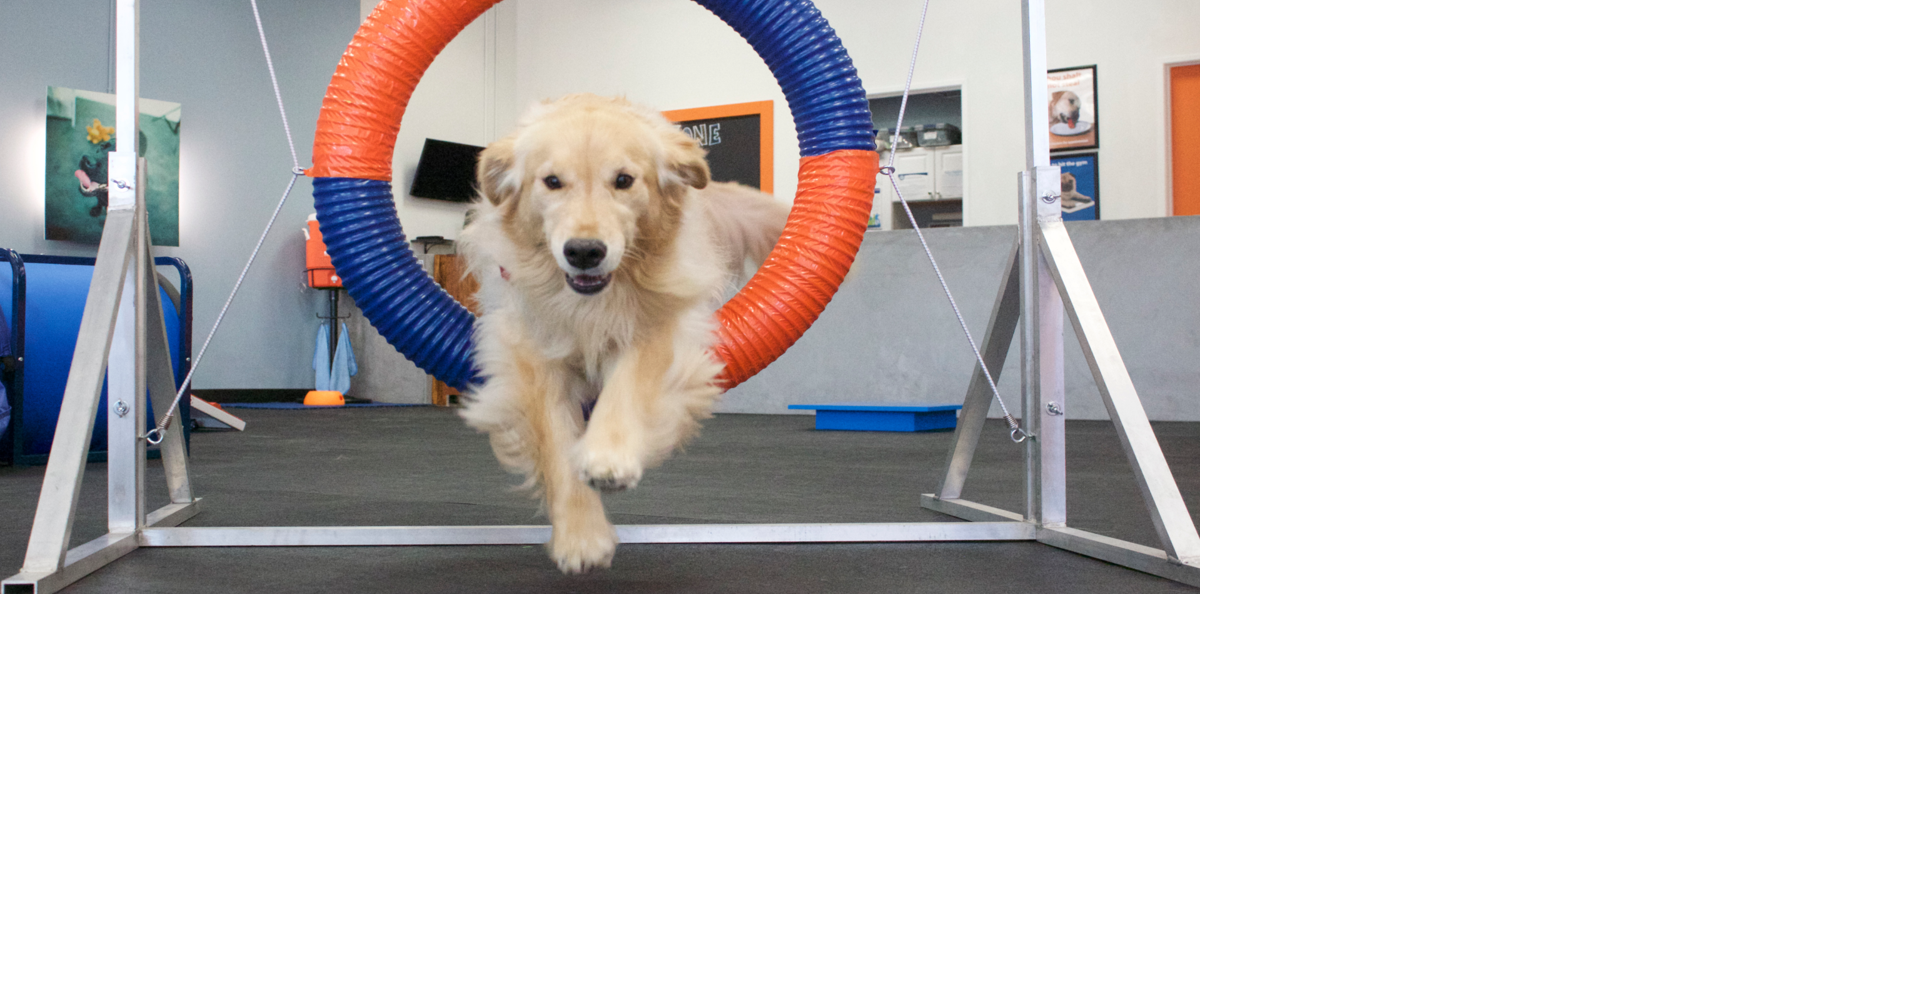 Indoor dog training facility Zoom Room comes to Richmond with $5 agility classes this weekend